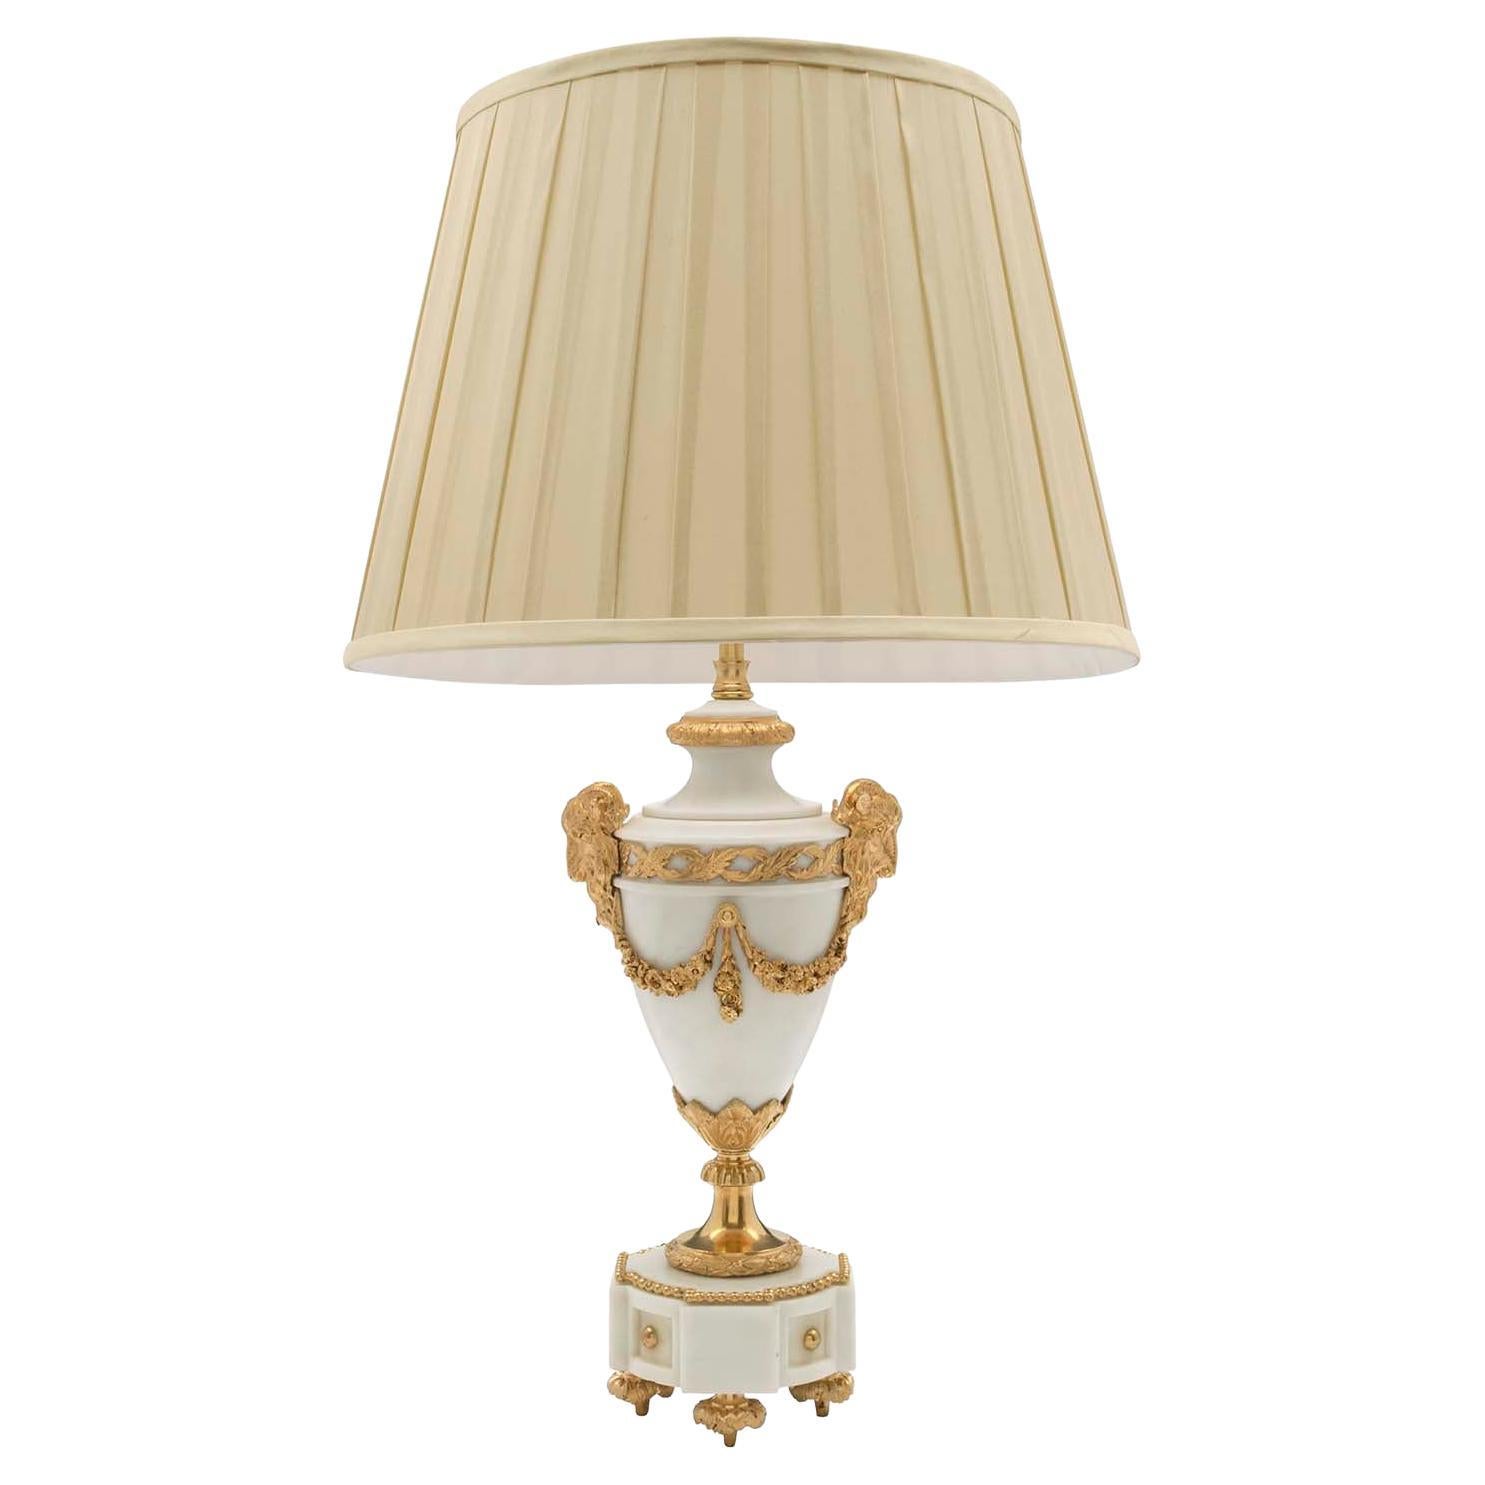 French 19th Century Louis XVI Style White Carrara Marble and Ormolu Lamp For Sale